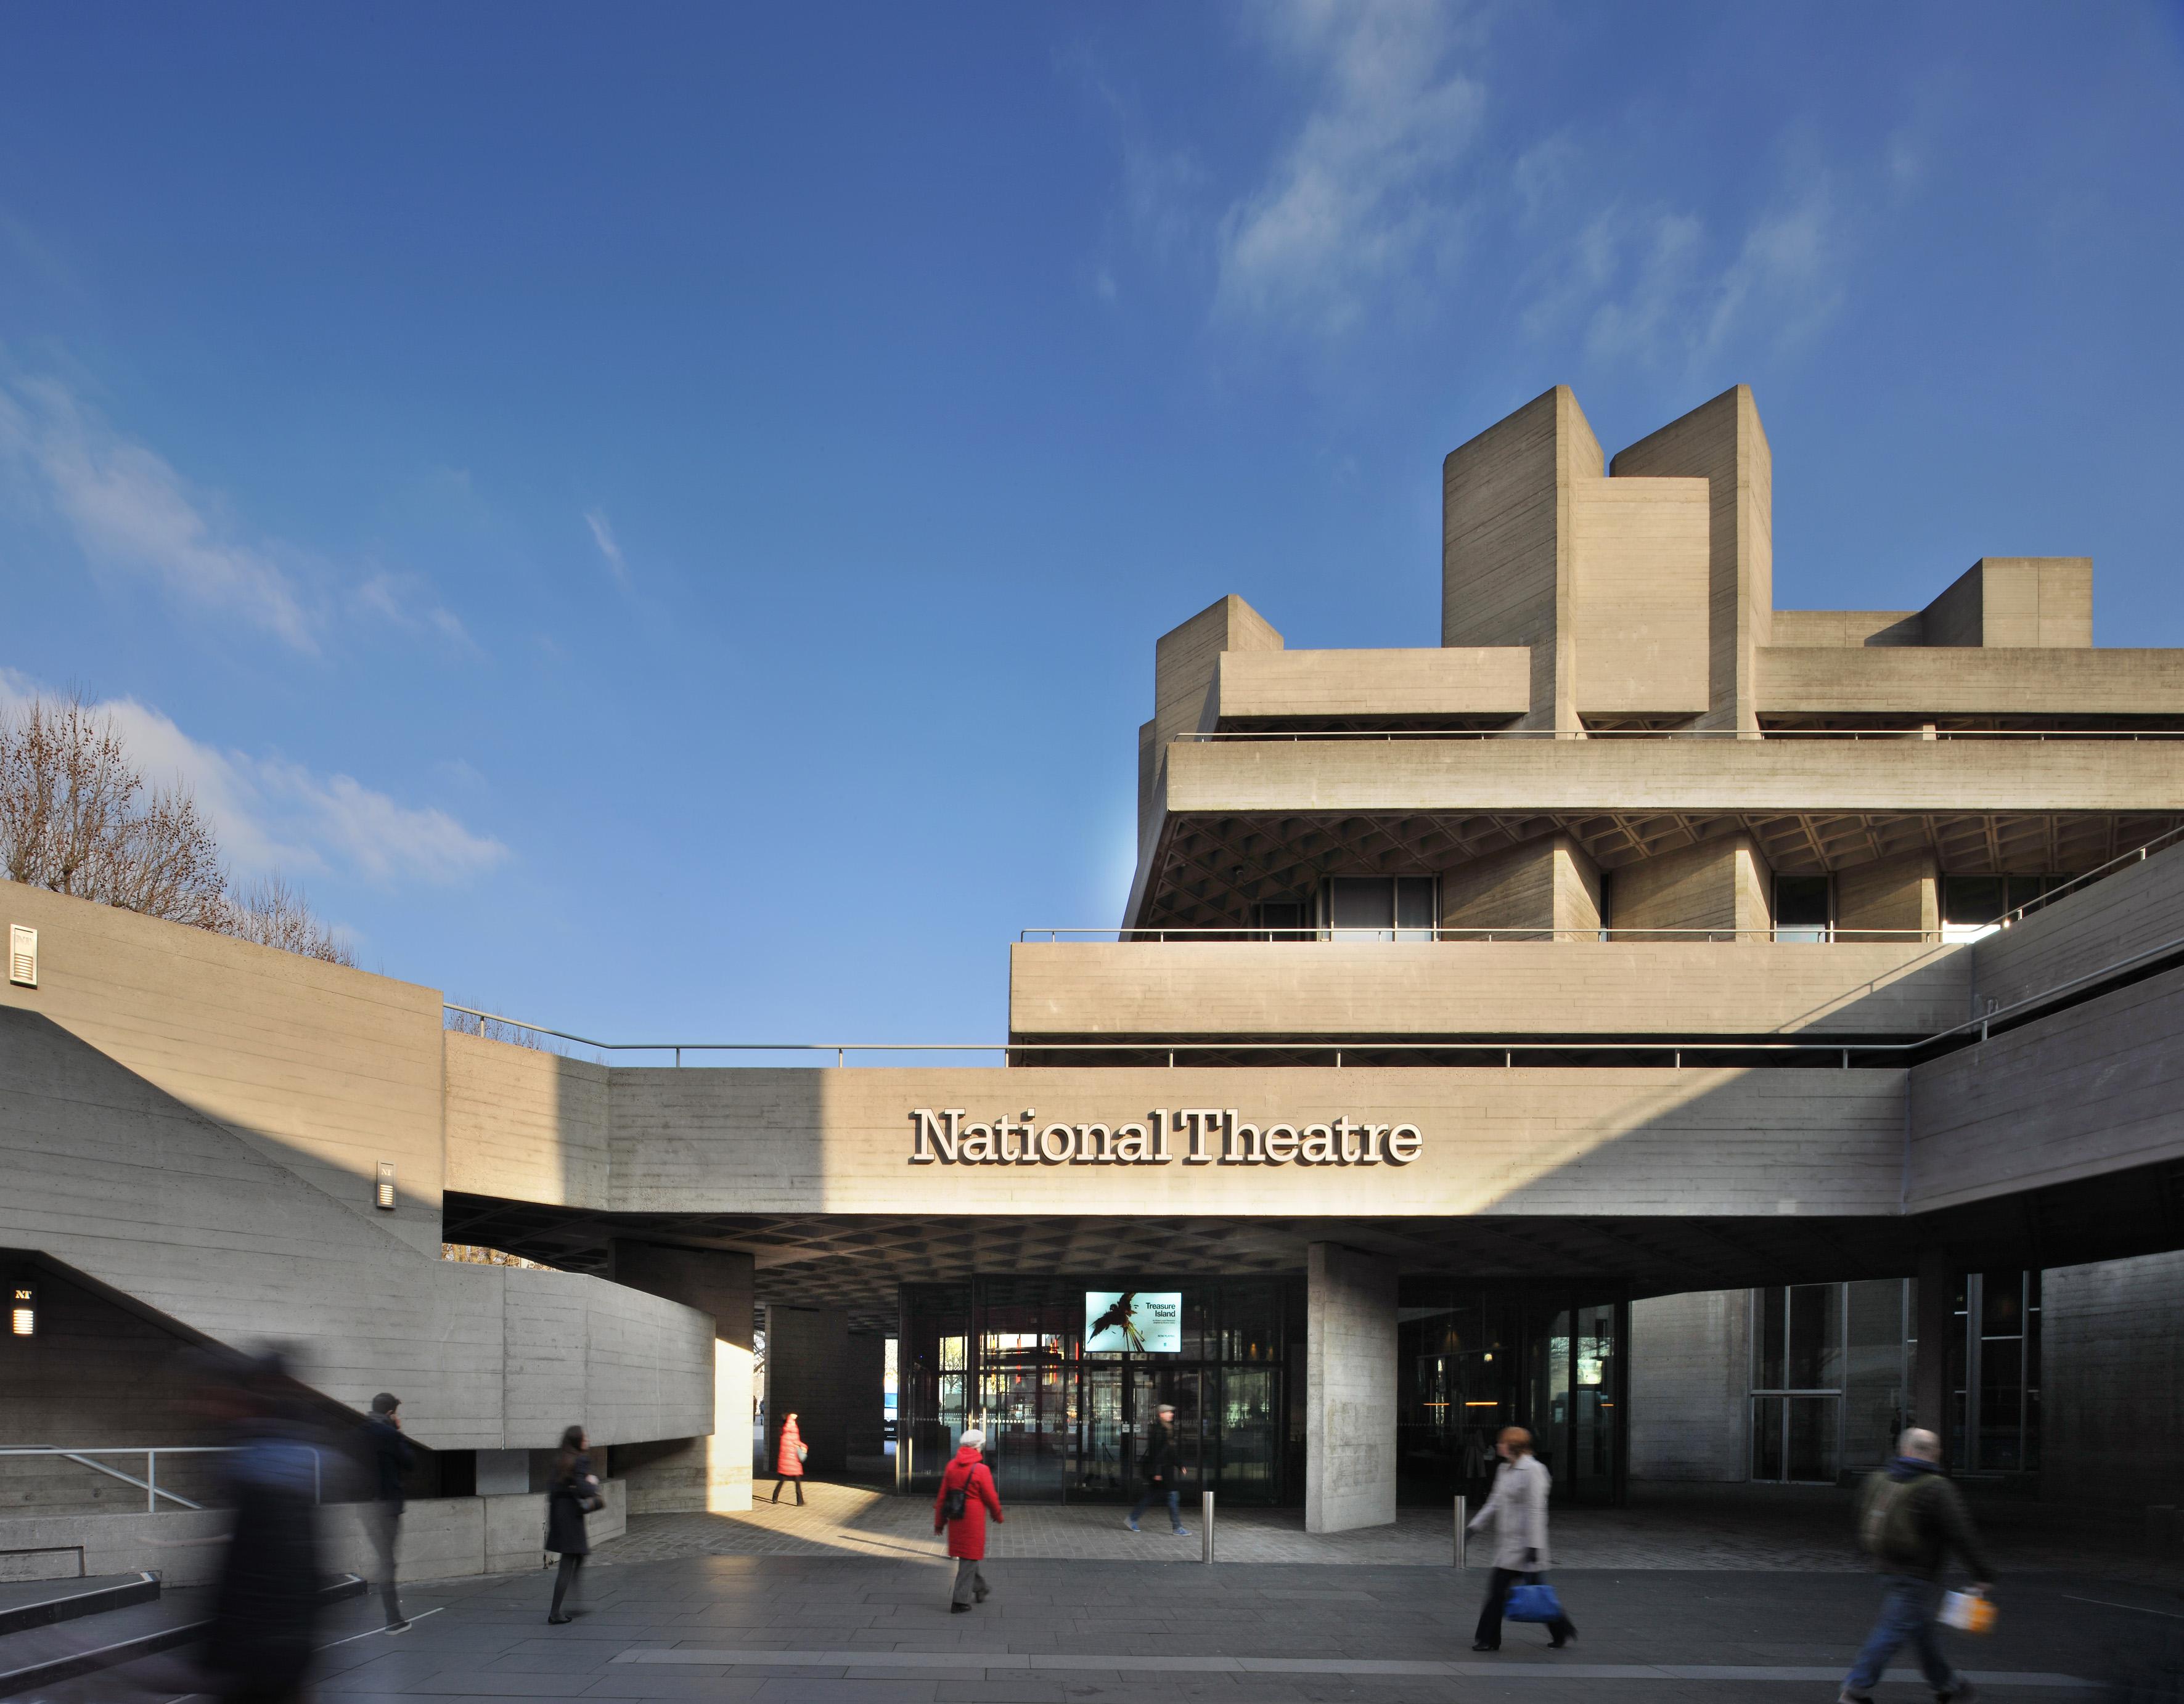 NT Entrance March 2015 2. Photo by Philip Vile